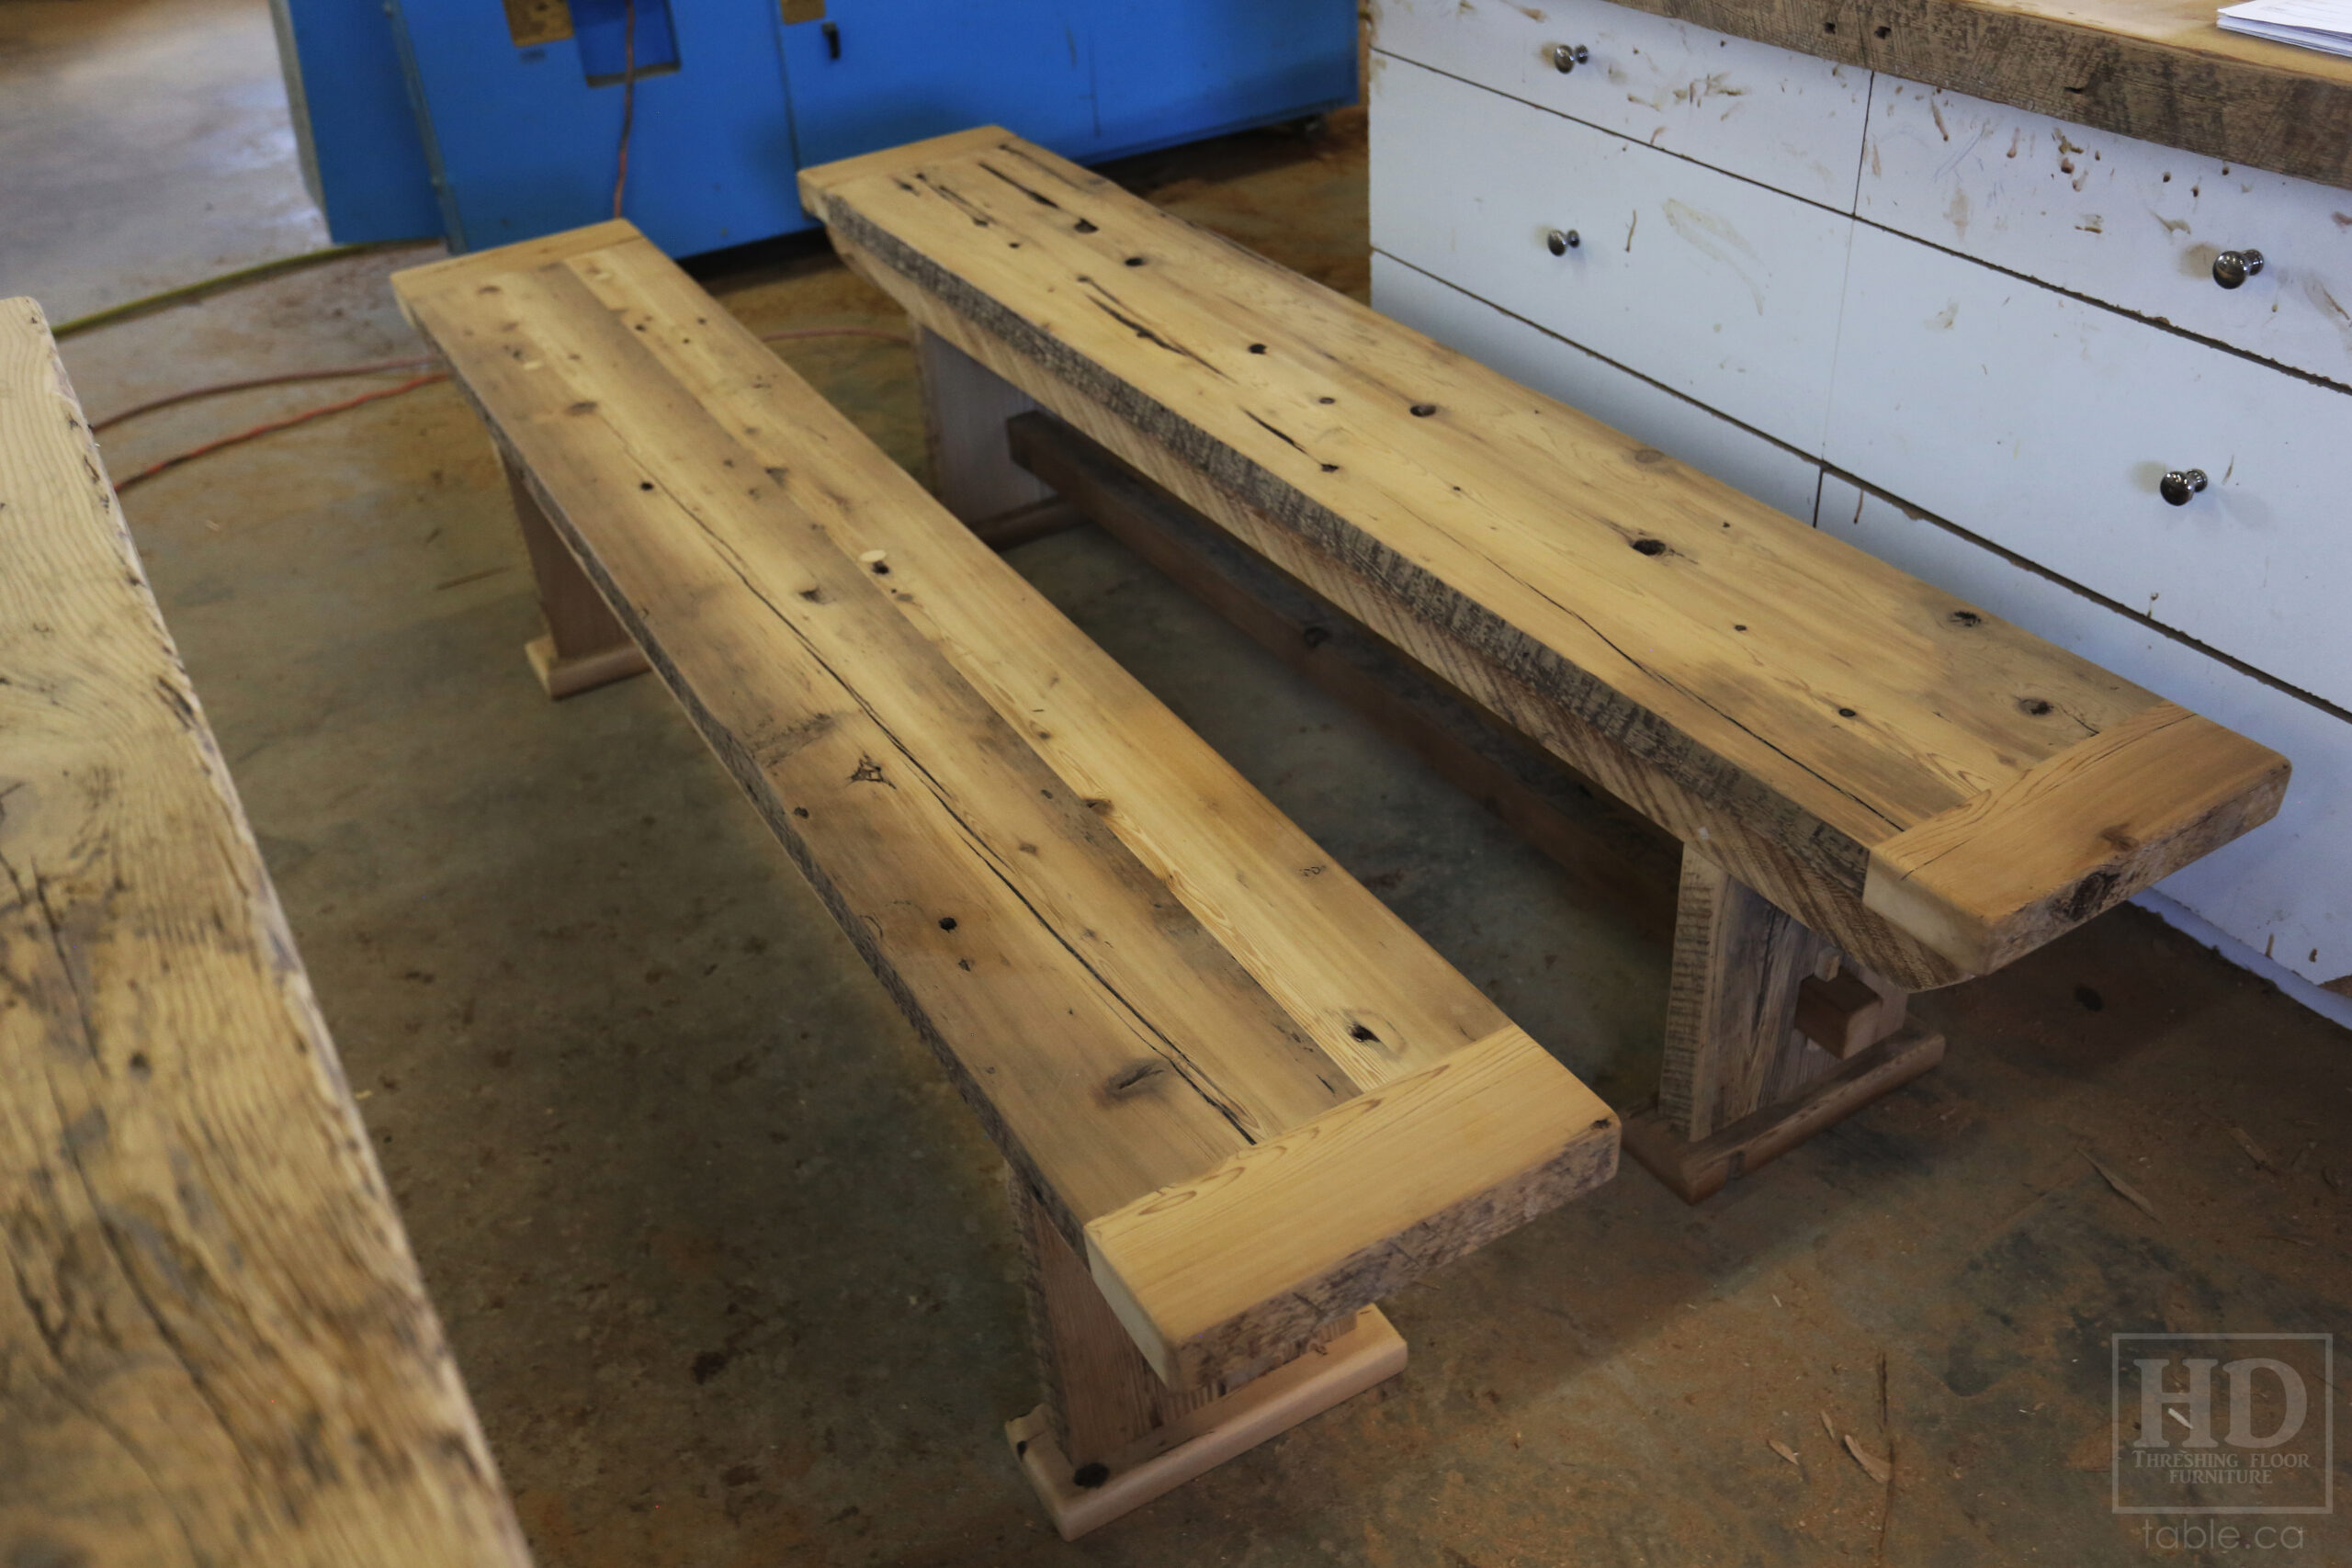 6.5' Reclaimed Ontario Barnwood Table we made for a Grismby home - 36" deep - Trestle Base - Old Growth Hemlock Threshing Floor Construction - Original edges & distressing maintained - Black Stain Option - Premium epoxy + matte polyurethane finish - [2] Matching 6.5' Benches - [2] Plank Back Chairs / Wormy Maple - www.table.ca